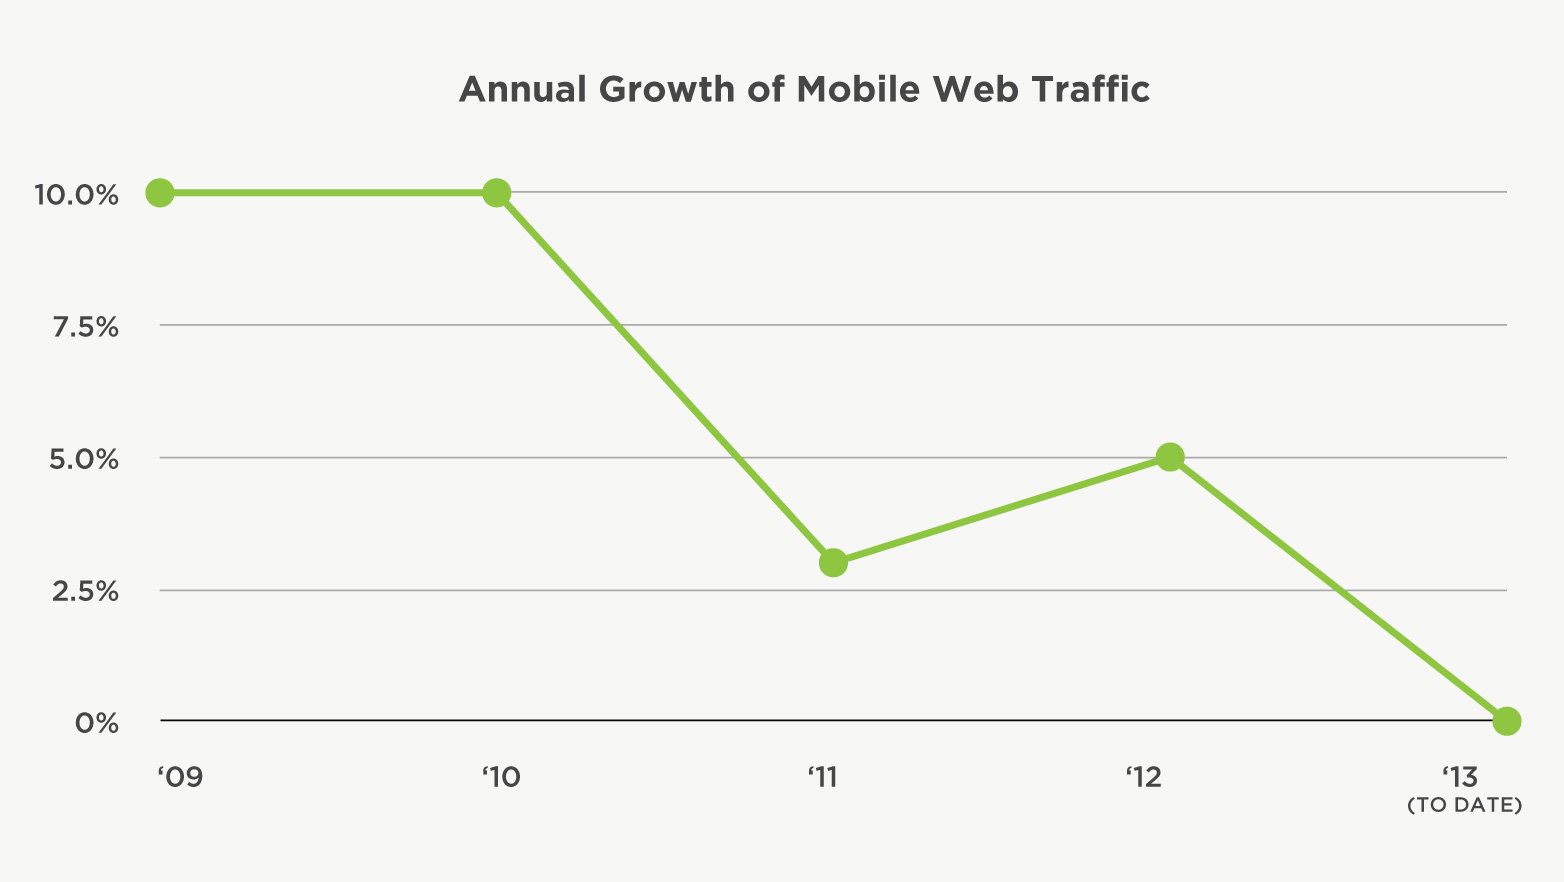 Mobile traffic growth